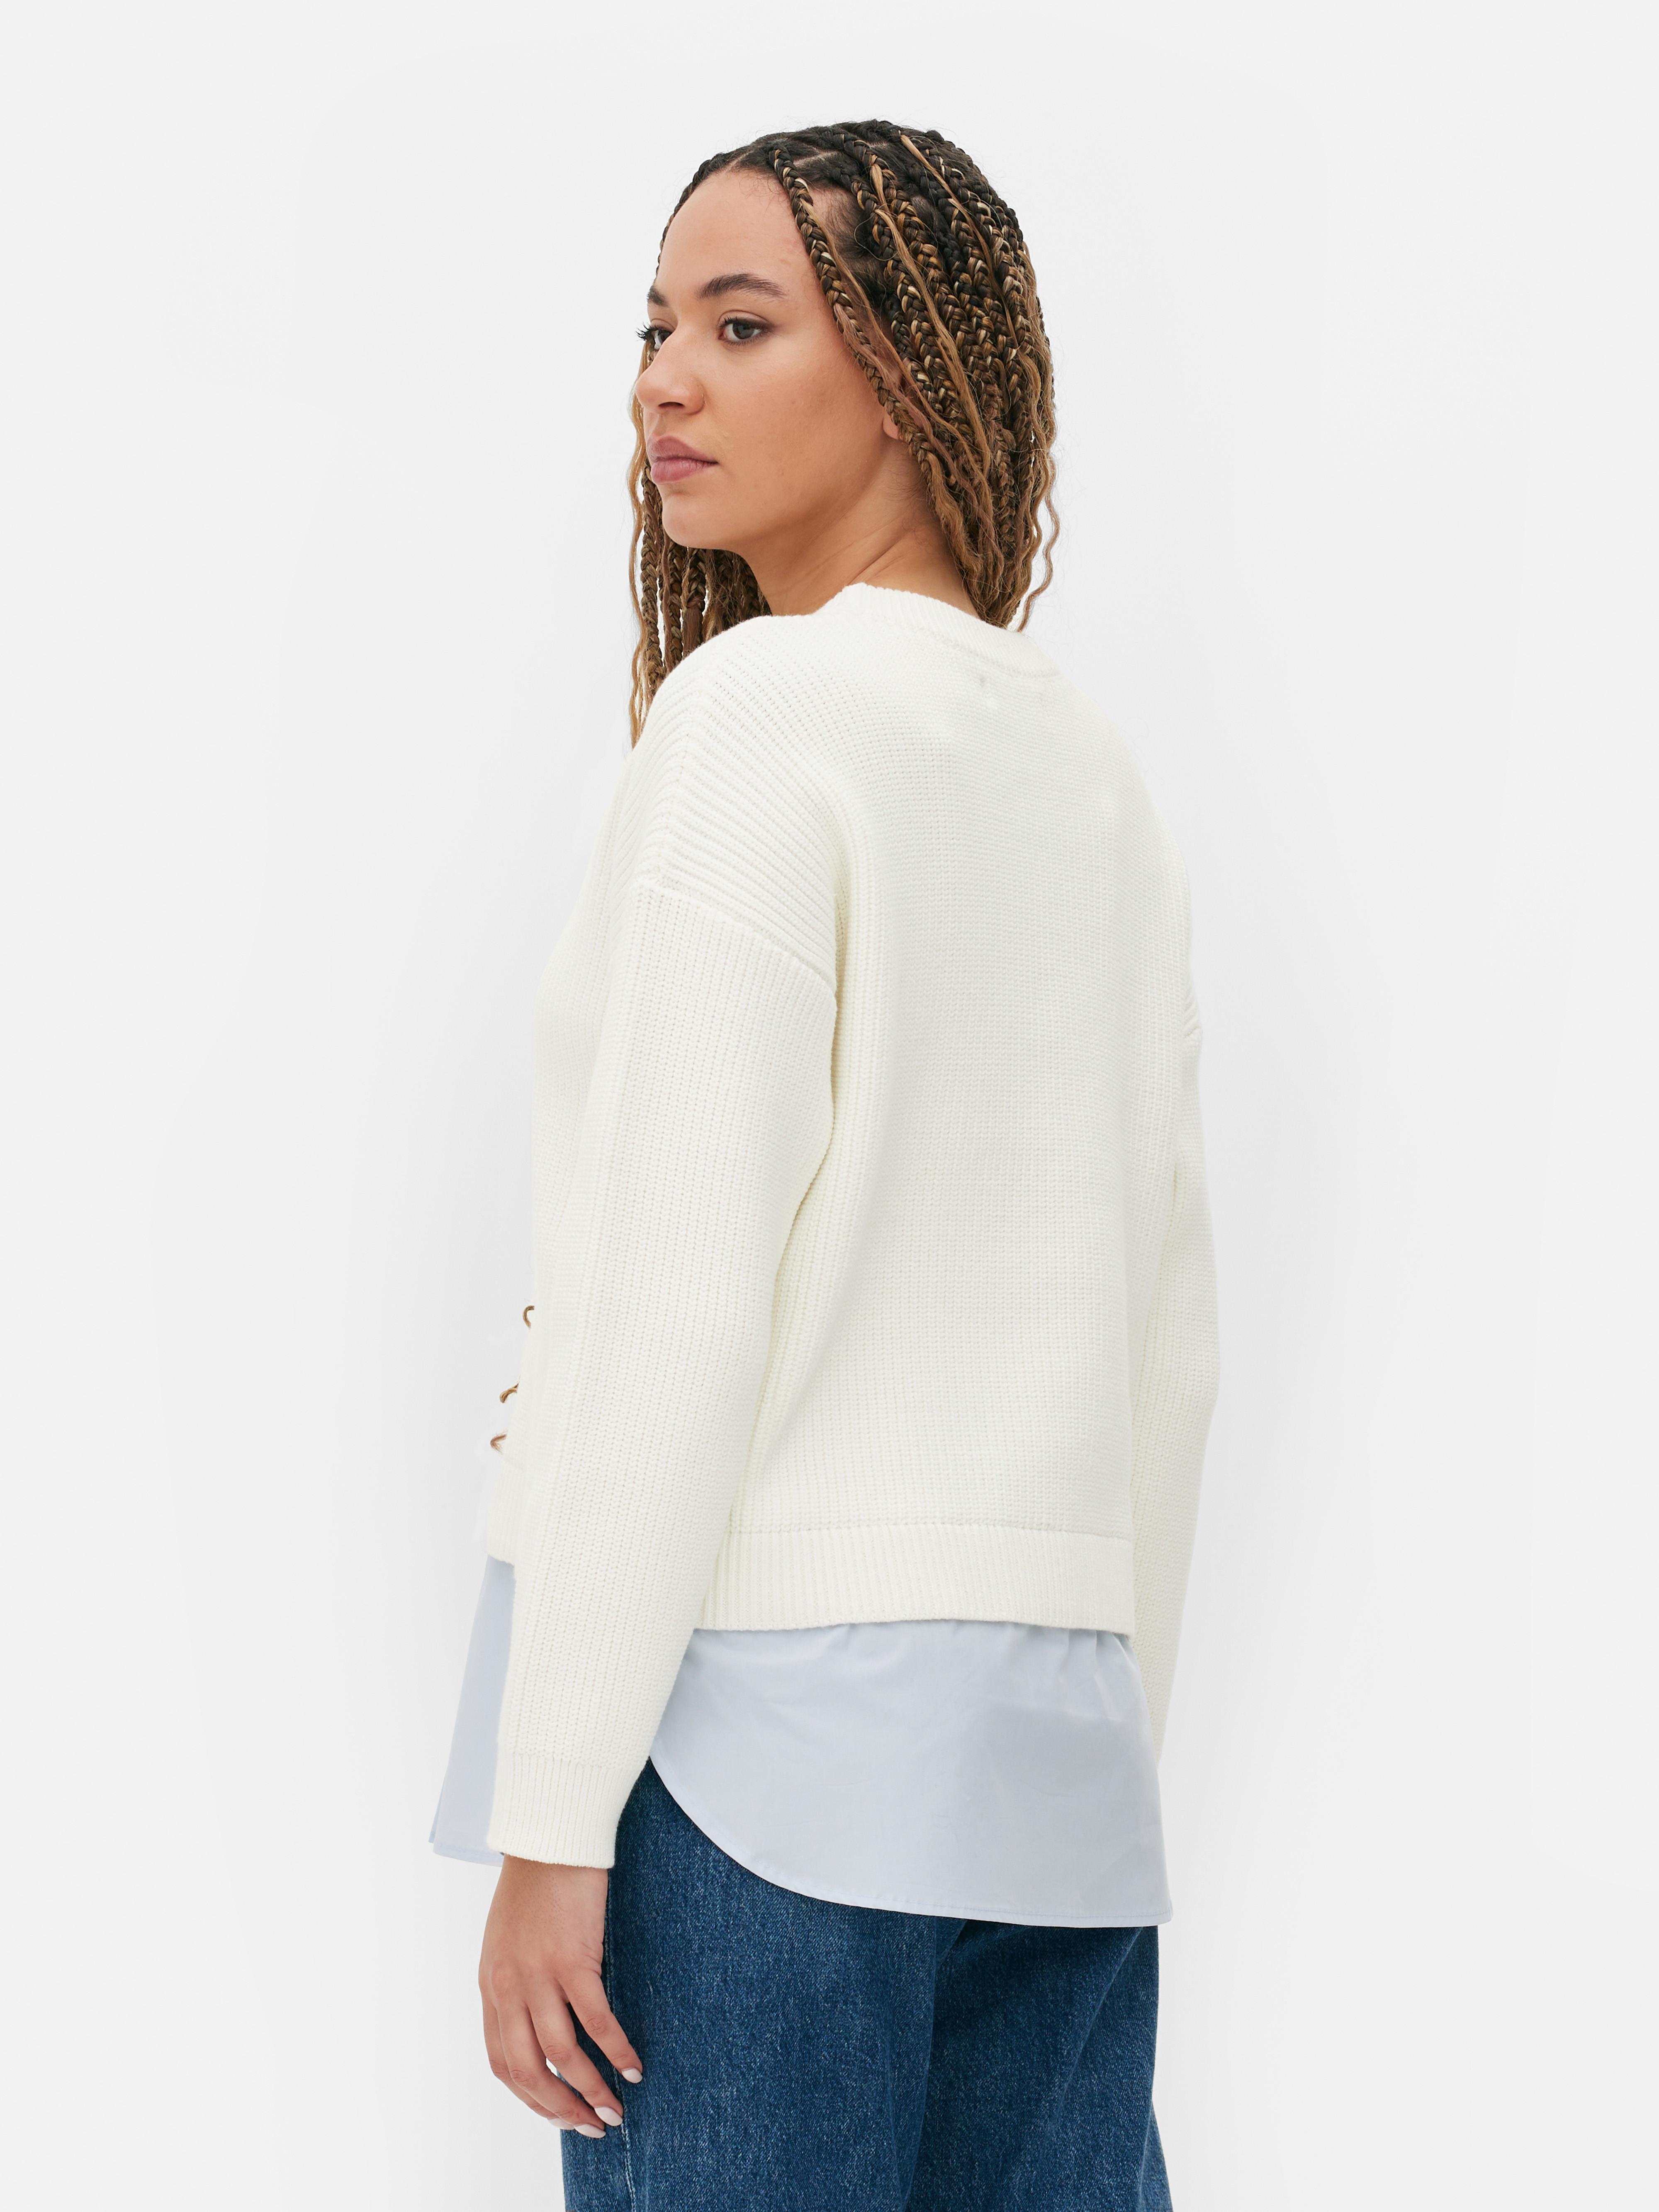 Womens Ivory Two-in-One Crew Neck Jumper and Shirt | Primark